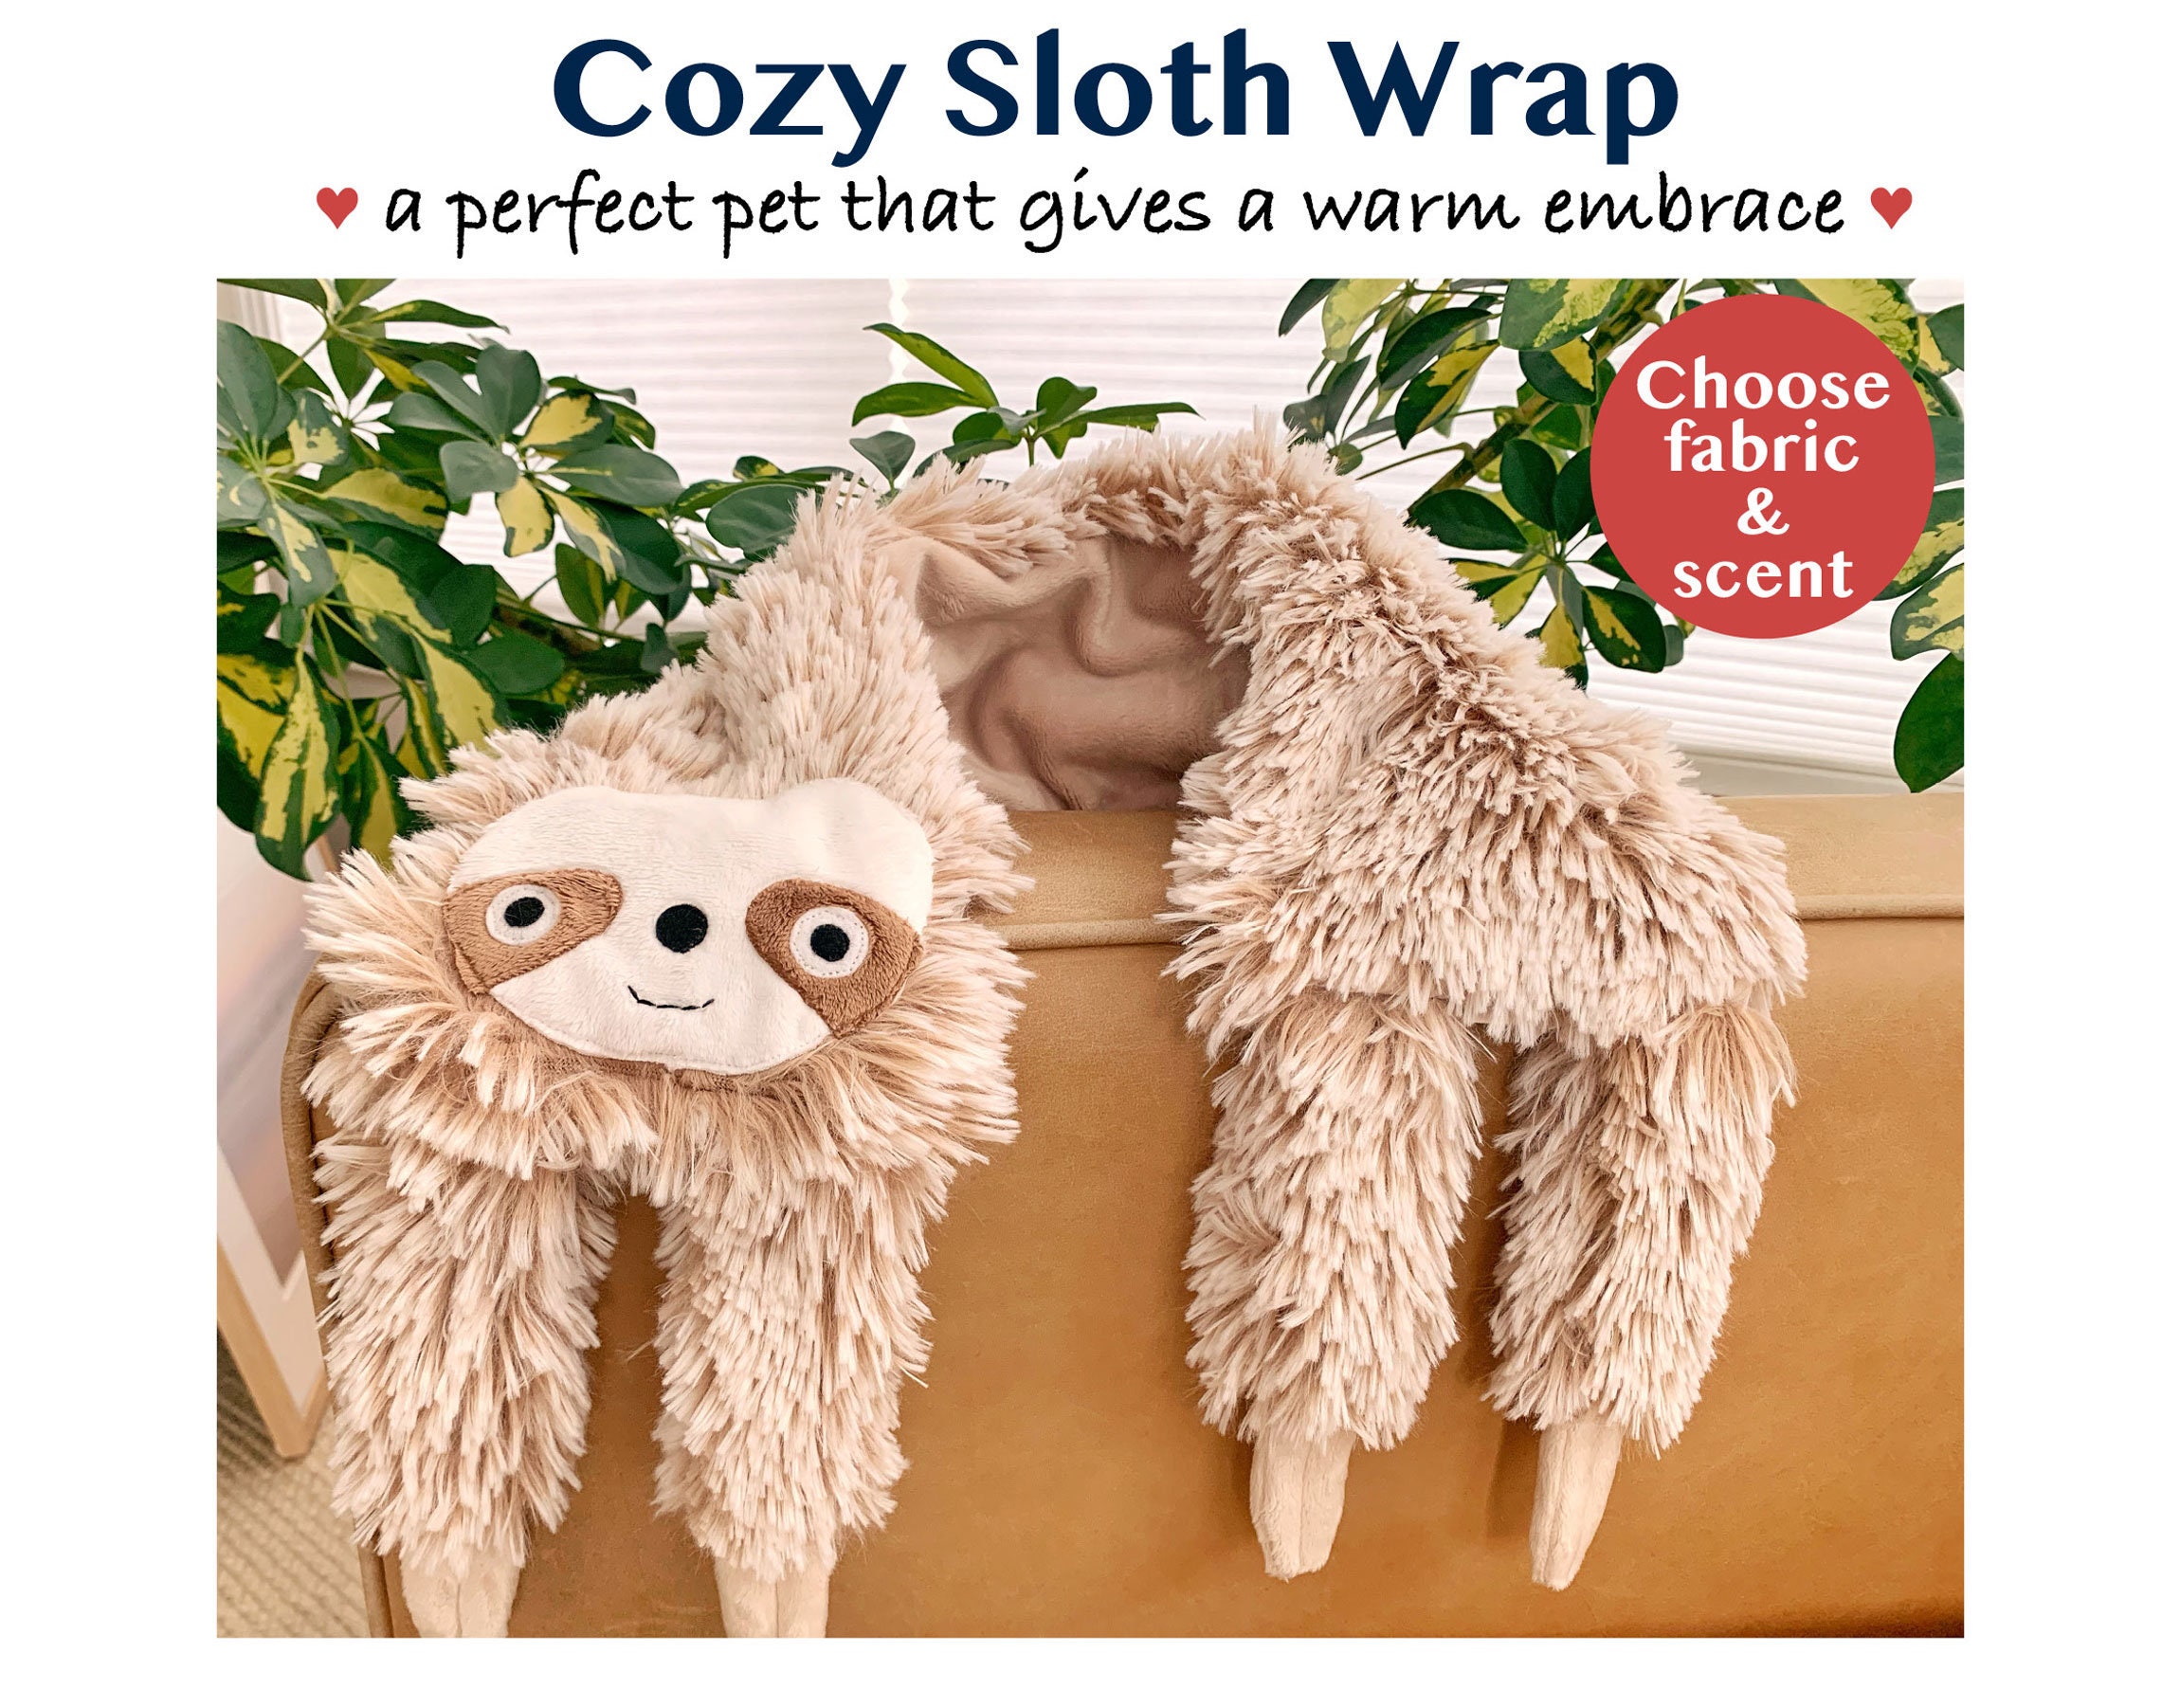 Cute Sloth Neck Wrap | Hot Cold Rice Comfort Pack | Hang in There Plush Animal Heating Pad | Washable Handmade Shoulder Pet |Relaxation Gift